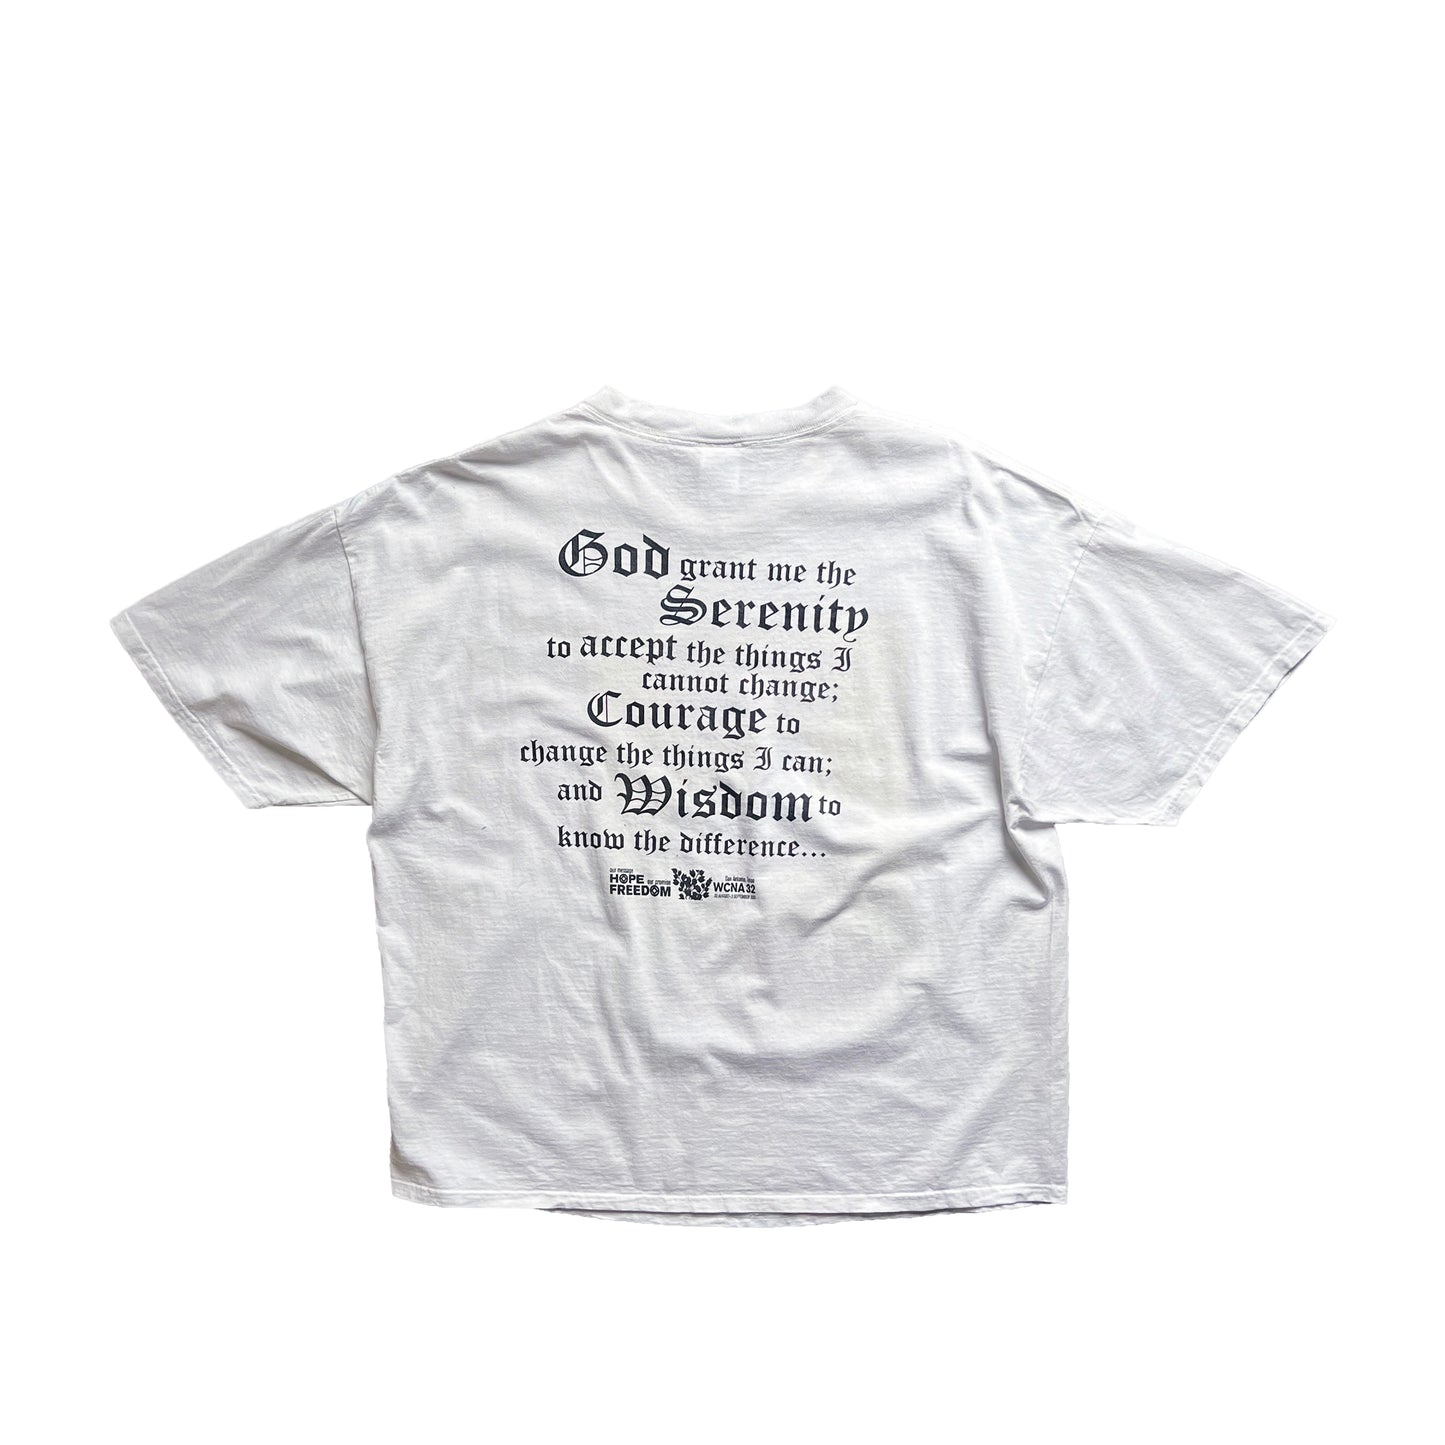 00's OUR MASSAGE HOPE T-SHIRT